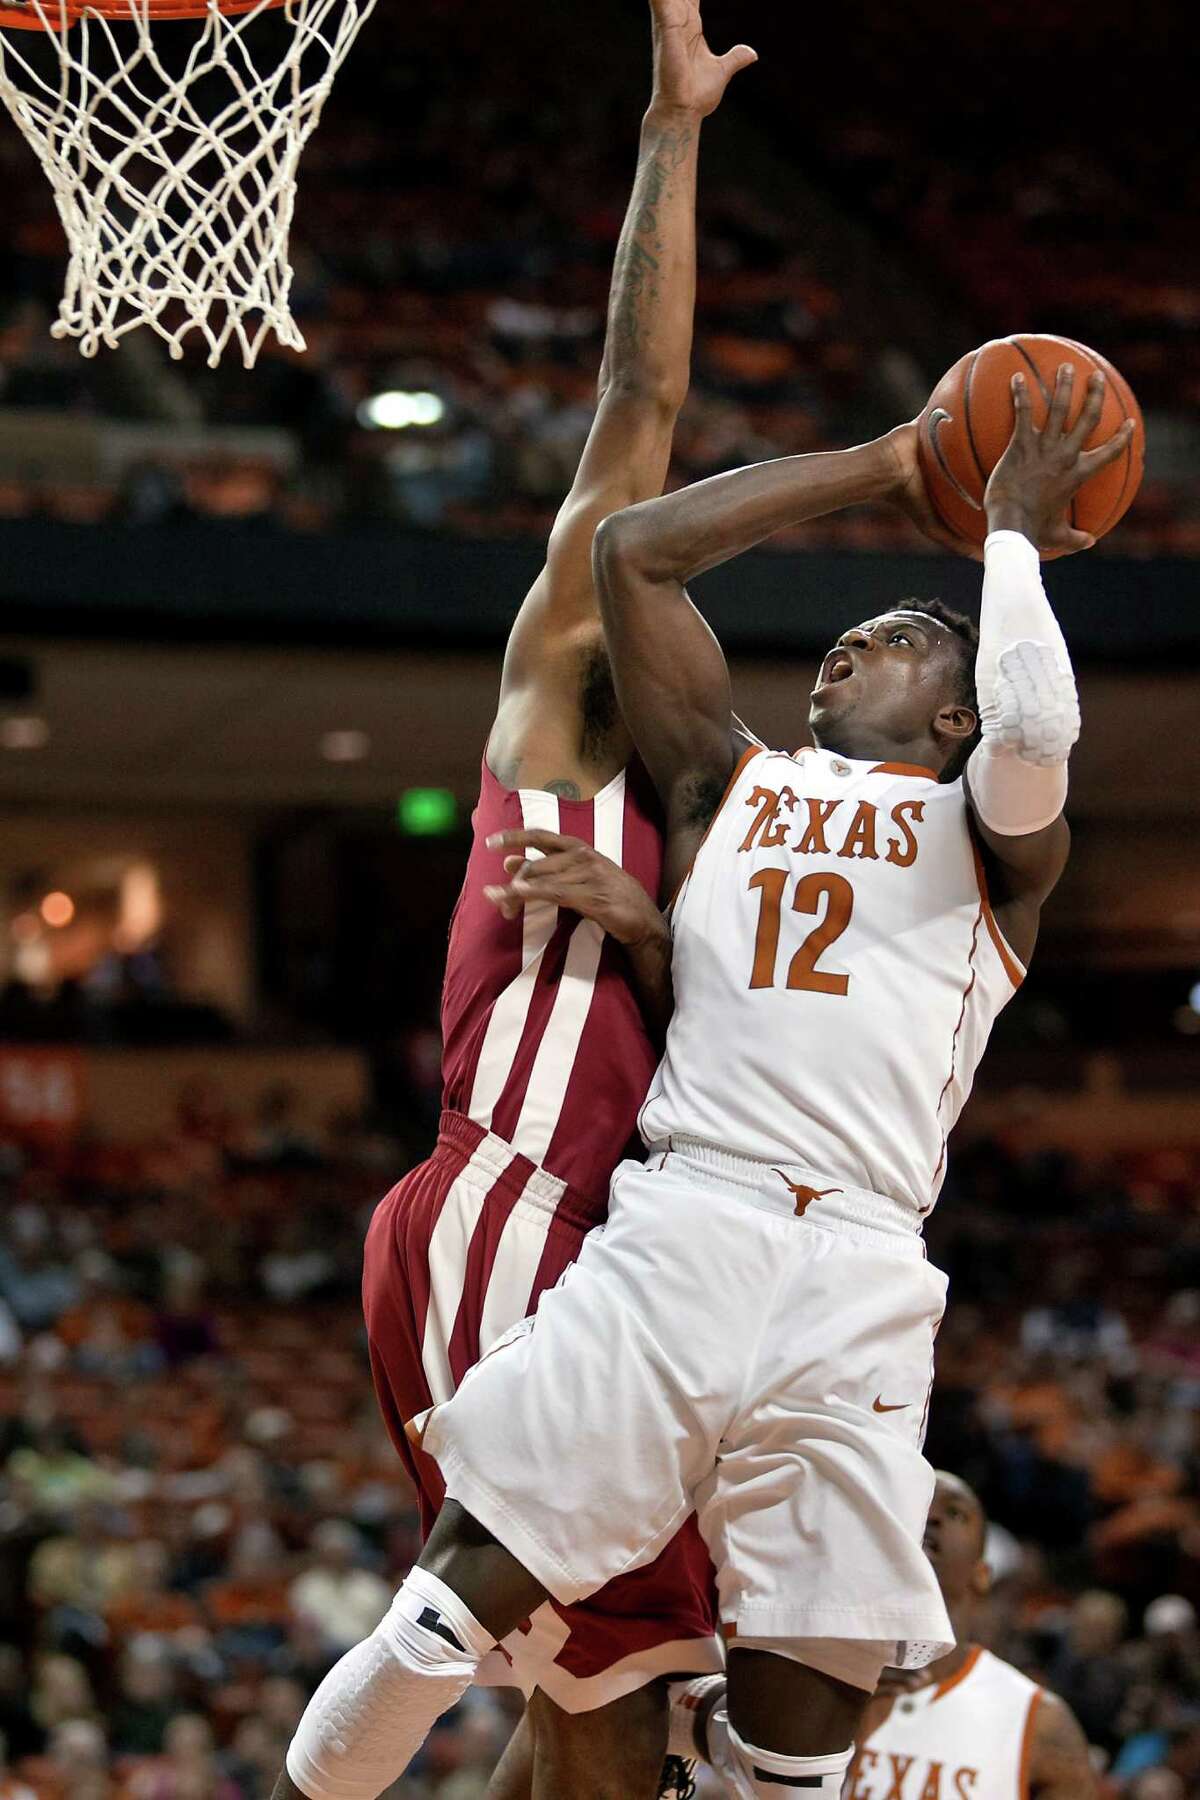 Texas' Myck Kabongo (12) went for 31 points Wednesday, including the jumper that sent the game into overtime.